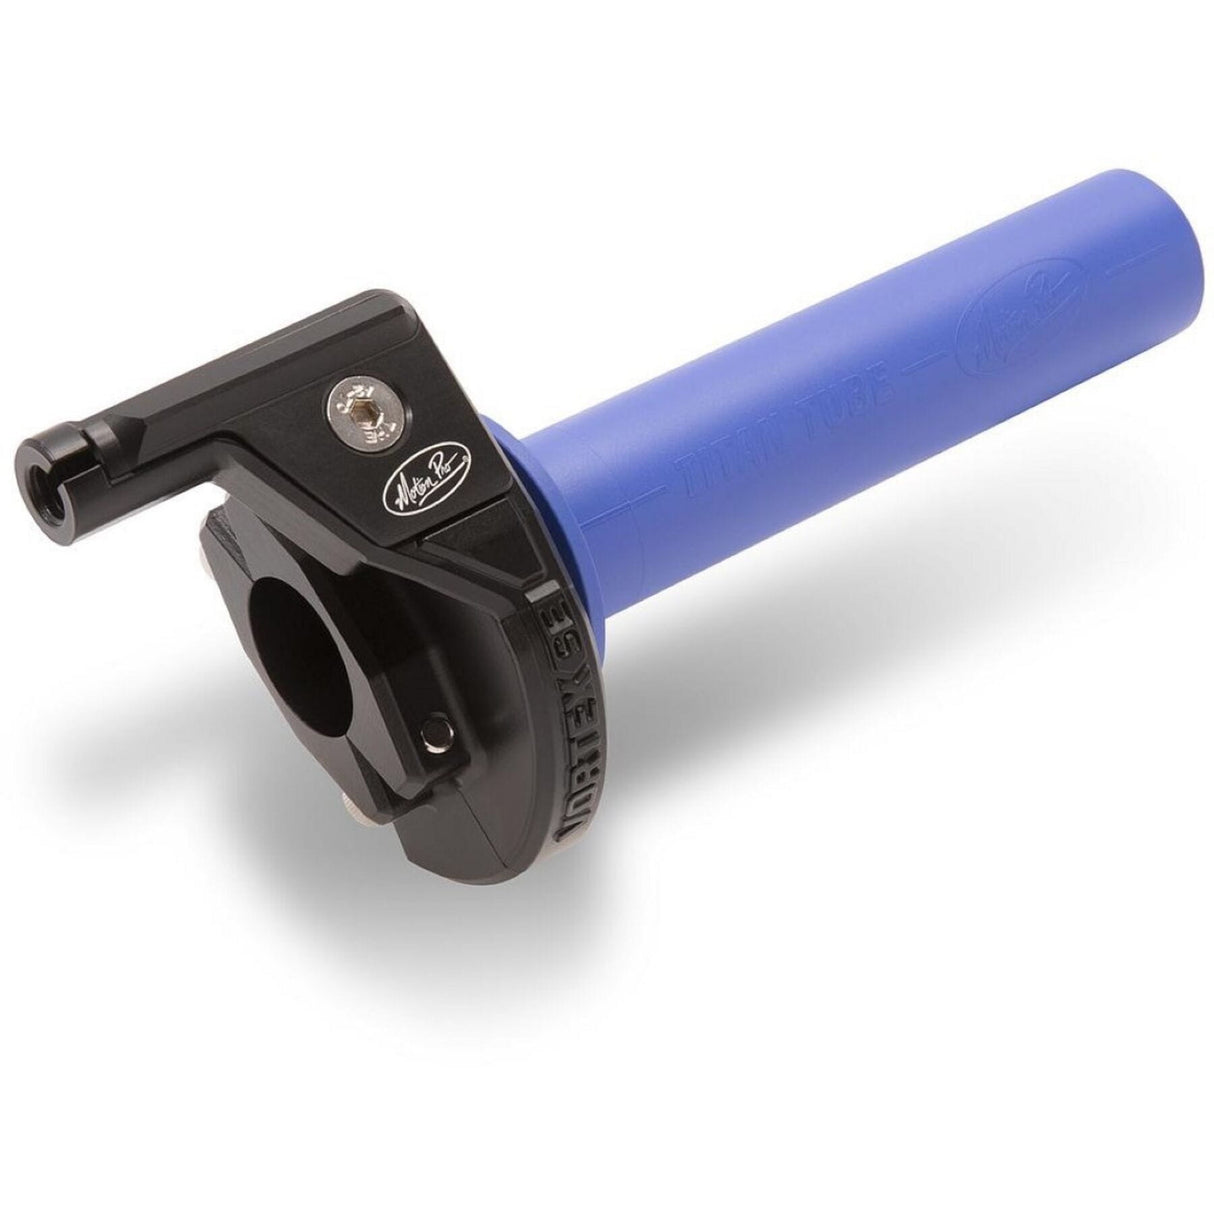 Motion Pro VORTEX Throttle tubeKX125/250 92-05, RM125/250 95-05, YZ125 and 250 96-10, and WR250